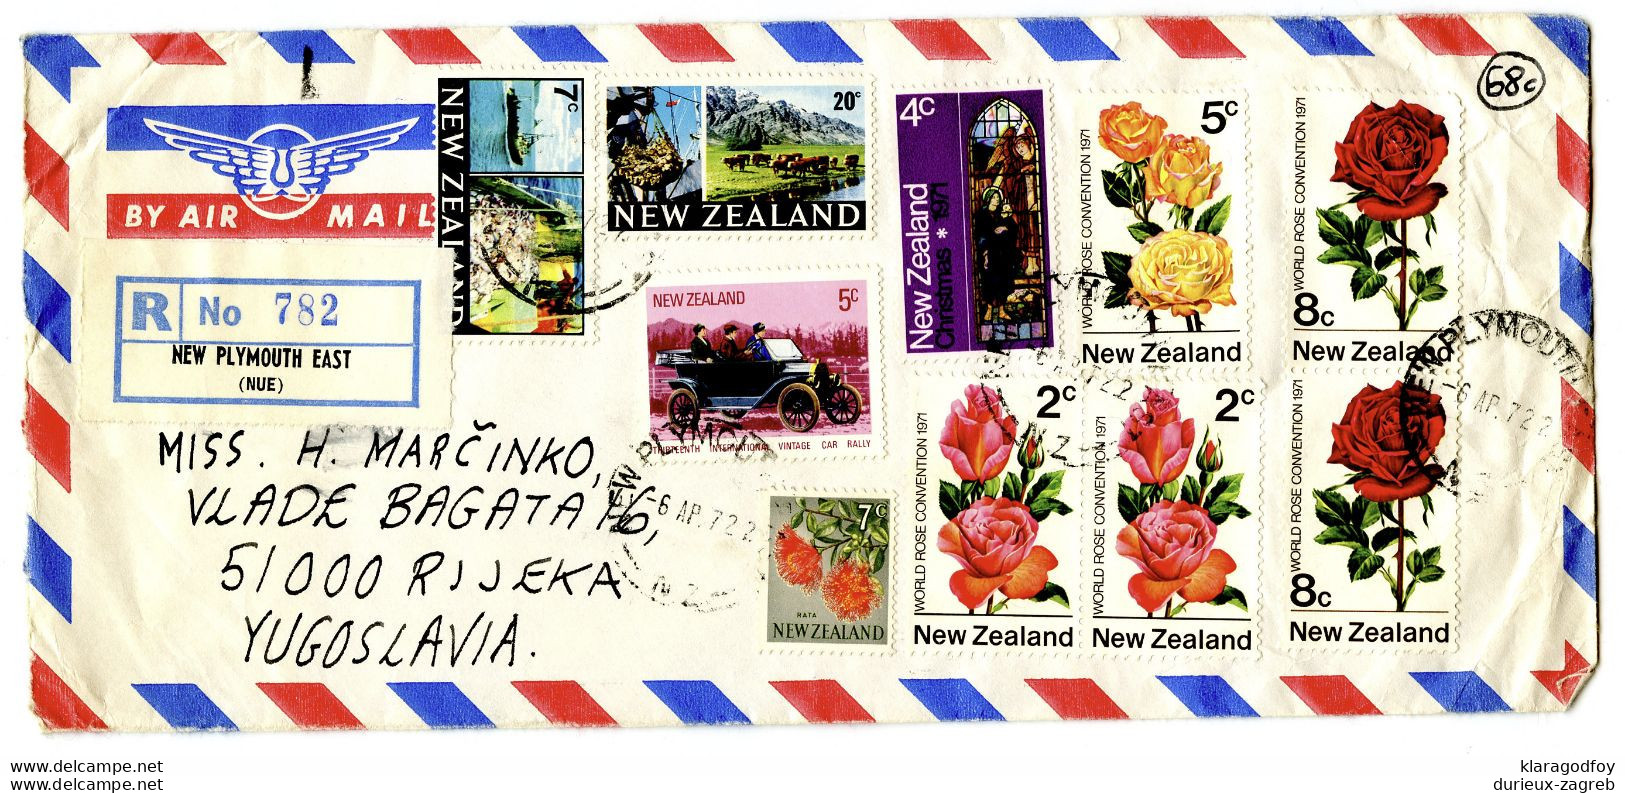 New Zealand Multifranked (roses) Air Mail Letter Cover Posted Registered 1972 New Plymouth Est Ot Rijeka B201101 - Briefe U. Dokumente